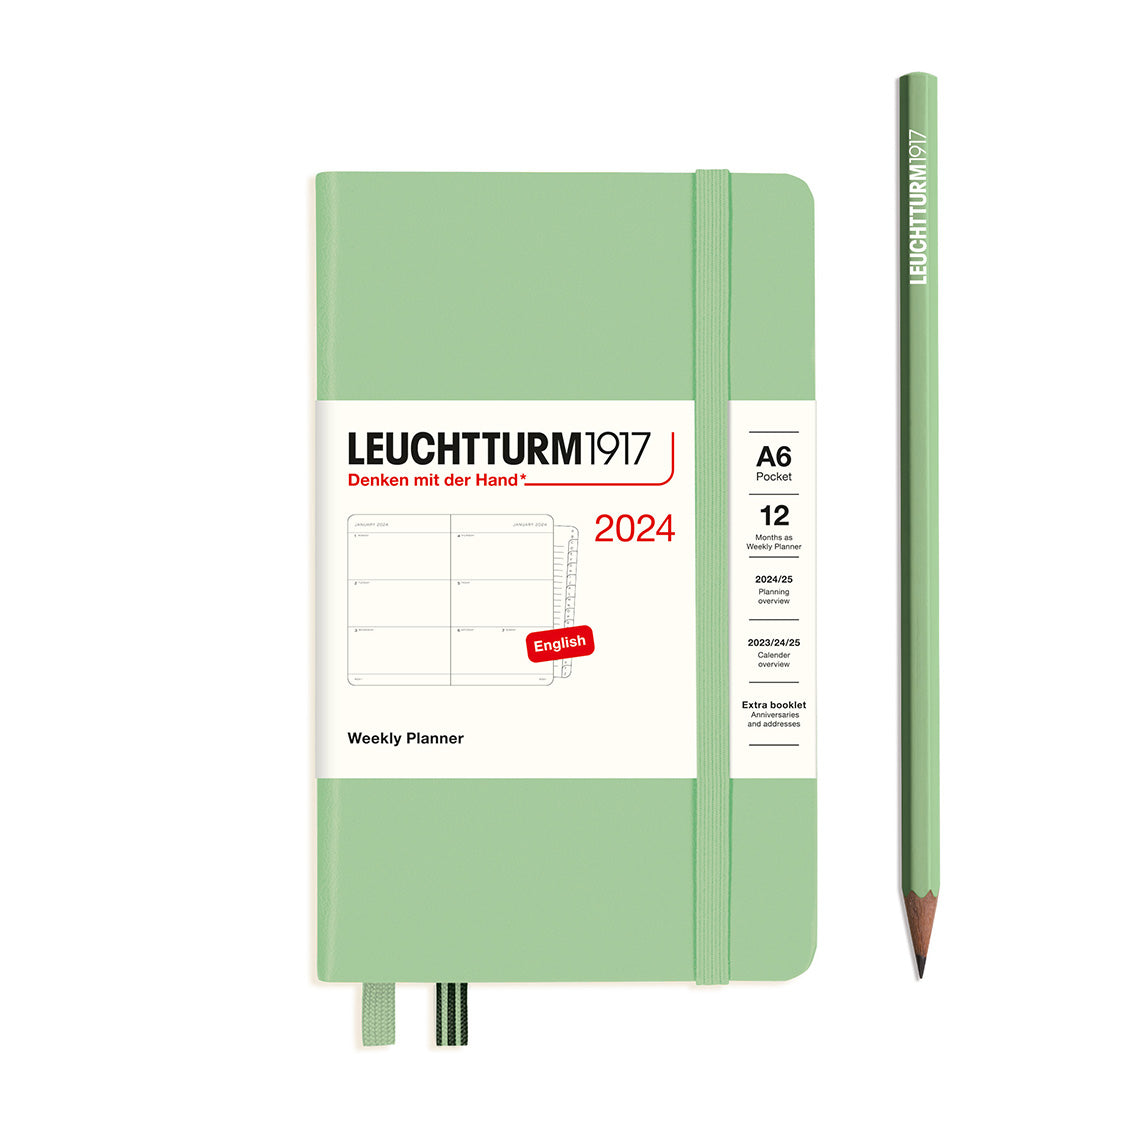 An image of a sage green planner with a sage green elastic band holding it together and a cream paper wrap around the middle stating the business name Leuchtturm1917, that it is for the year 2024, it is a weekly planner, is A6 in size and an English language version. It has an image on the wrap showing the inside layout which is a week spread across 2 pages. A sage green pencil is shown at the side of the planner.